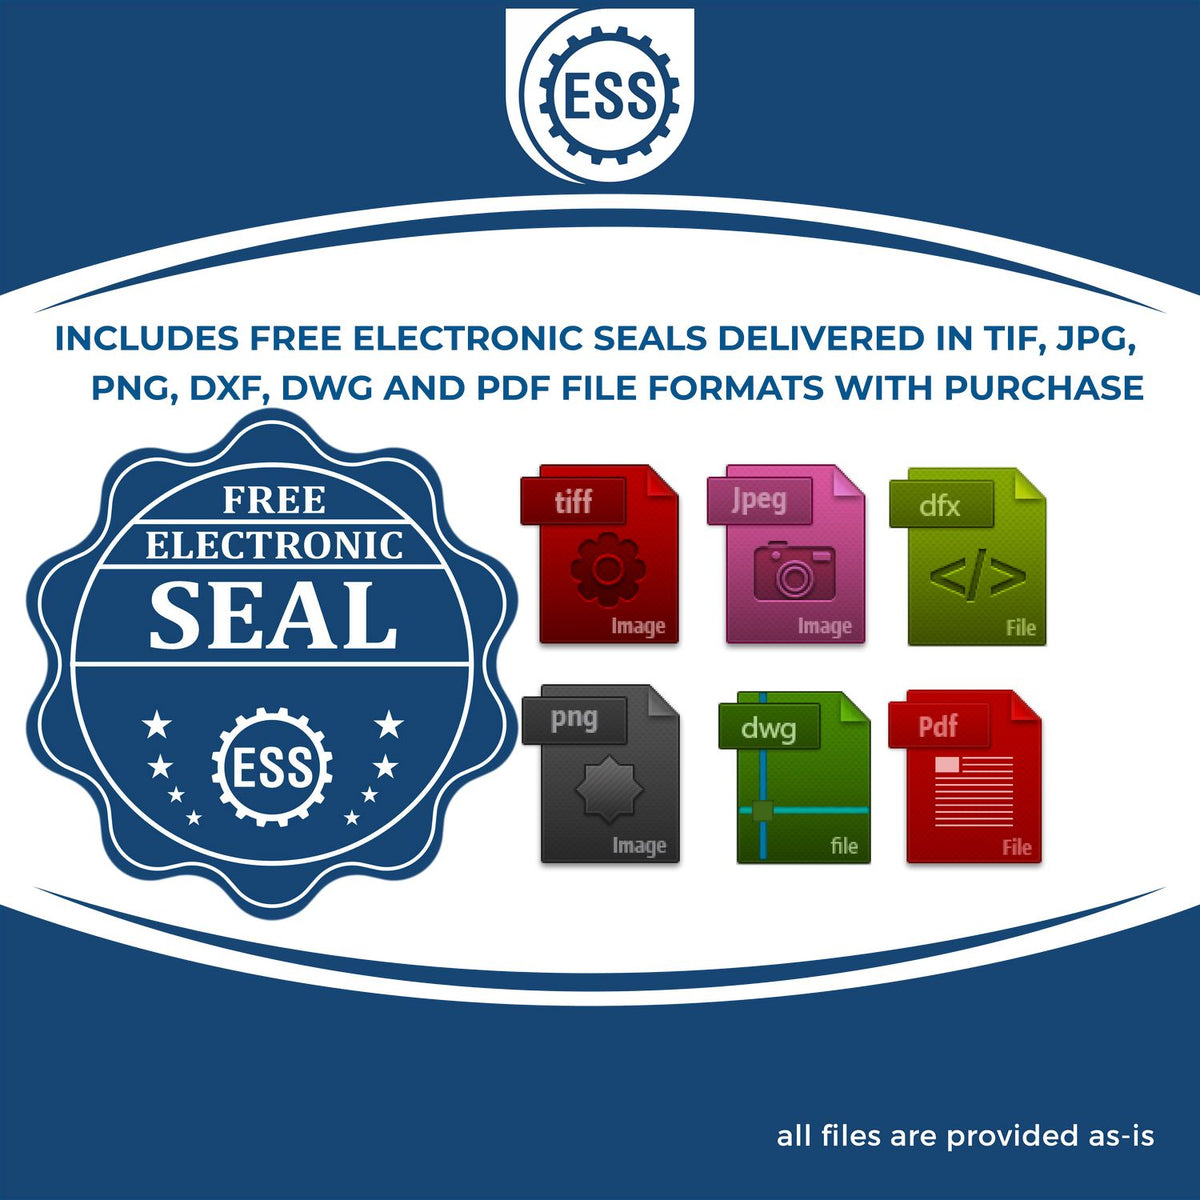 An infographic for the free electronic seal for the Heavy Duty Cast Iron Texas Geologist Seal Embosser illustrating the different file type icons such as DXF, DWG, TIF, JPG and PNG.